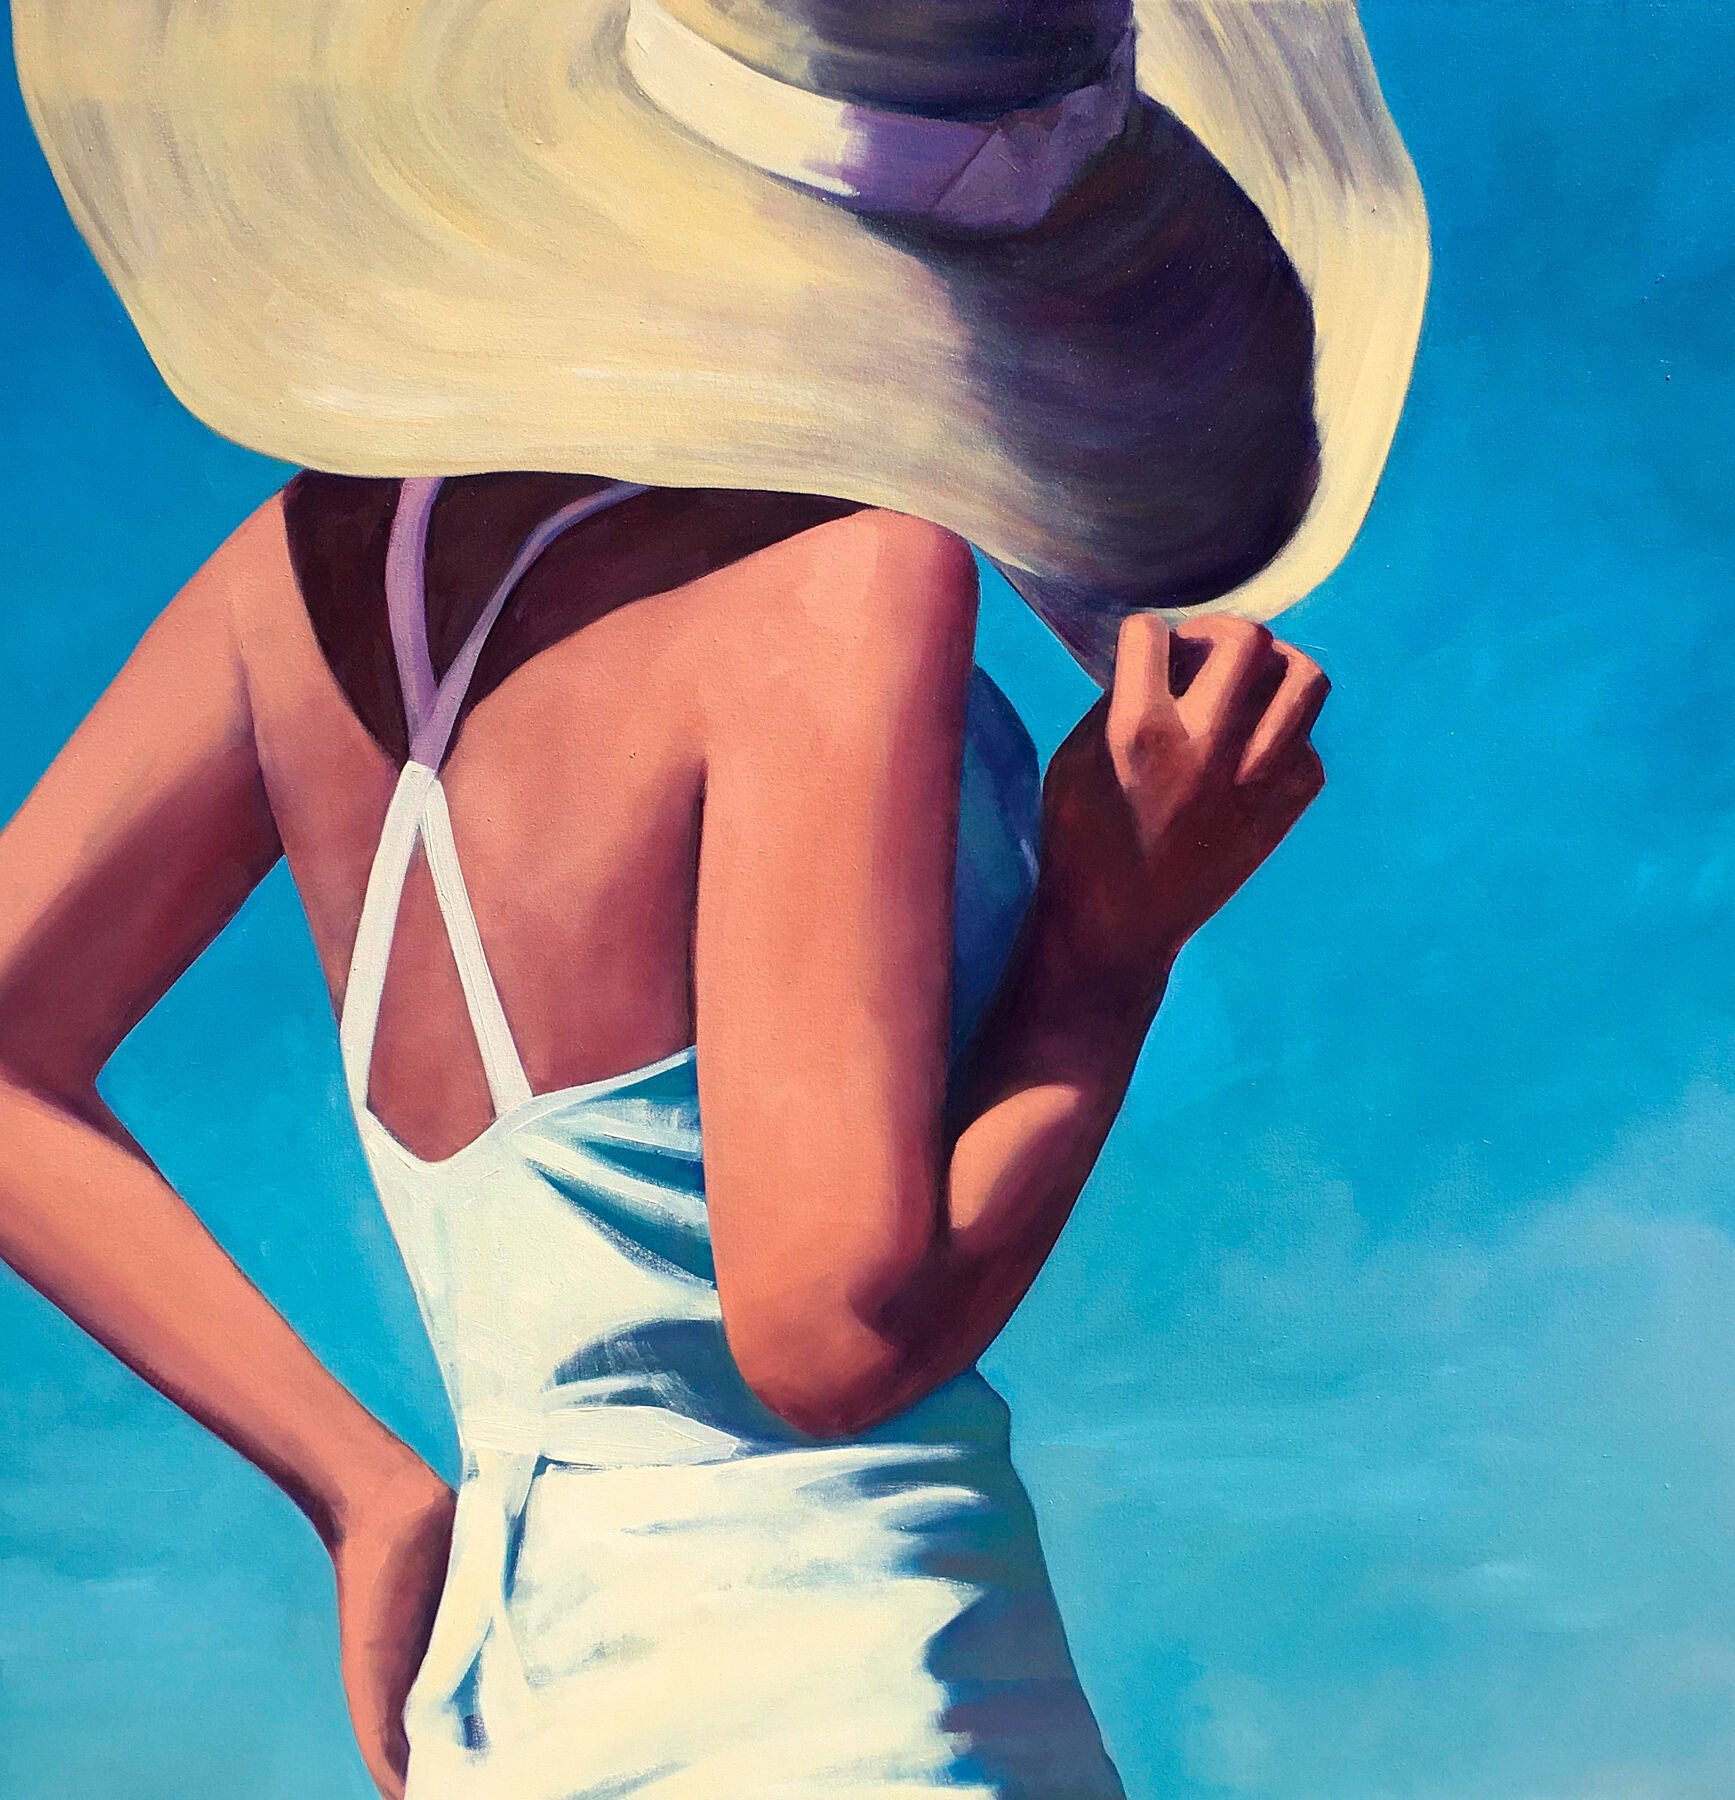 "Sunlight" blends nostalgia with vibrant colours and shows a woman in a white outfit, her back to the viewer, standing against a blue background. One of her hands sits on her hip, while the other toys with her large sunhat. Painting by T.S. Harris. 8365615